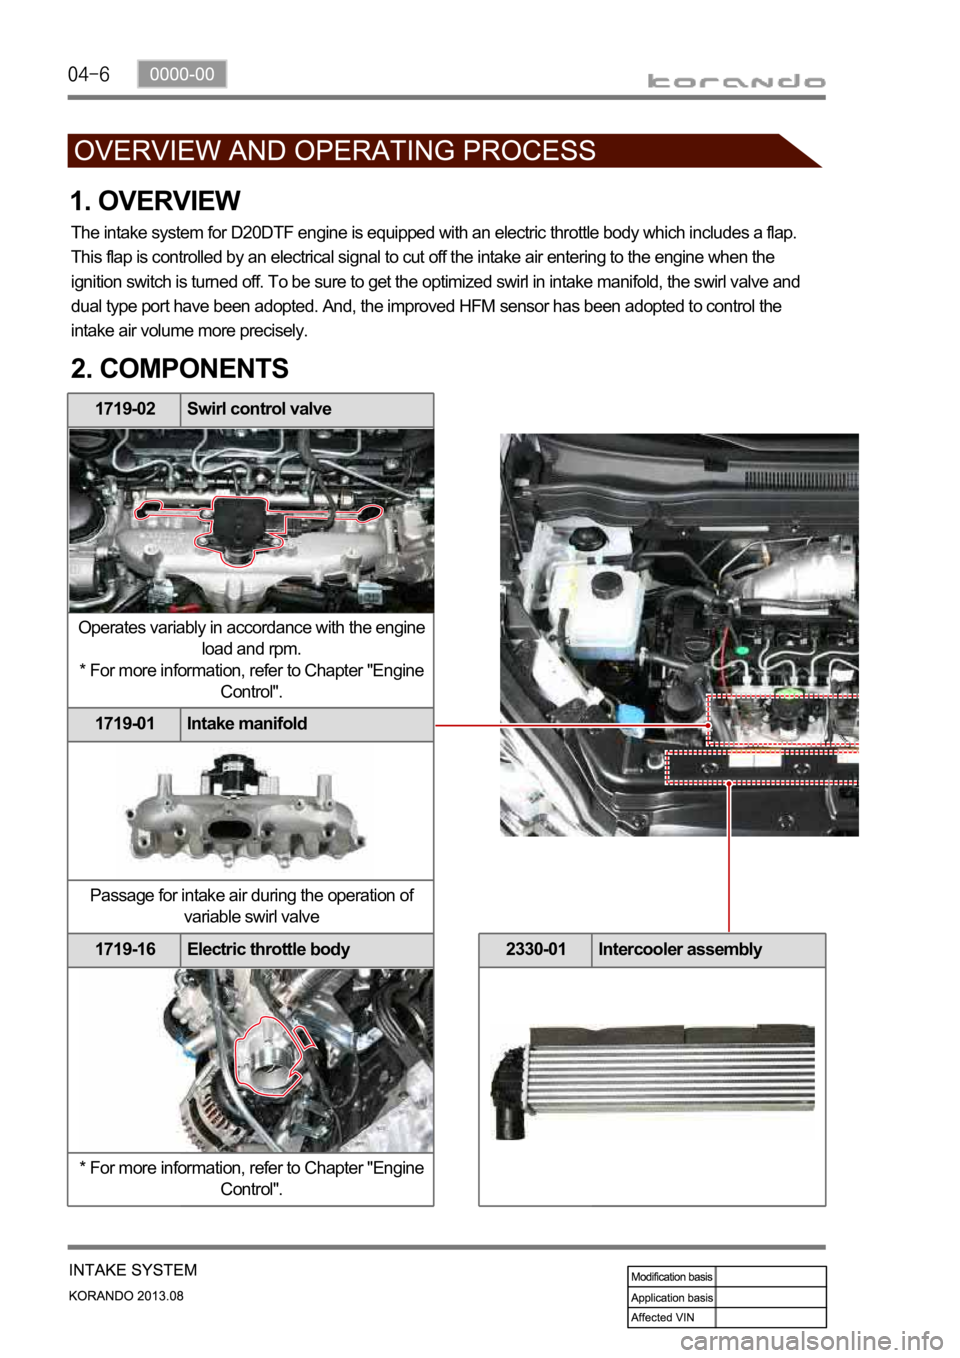 SSANGYONG KORANDO 2013  Service Manual 1719-02 Swirl control valve
Operates variably in accordance with the engine 
load and rpm.
* For more information, refer to Chapter "Engine 
Control".
1719-01 Intake manifold
Passage for intak